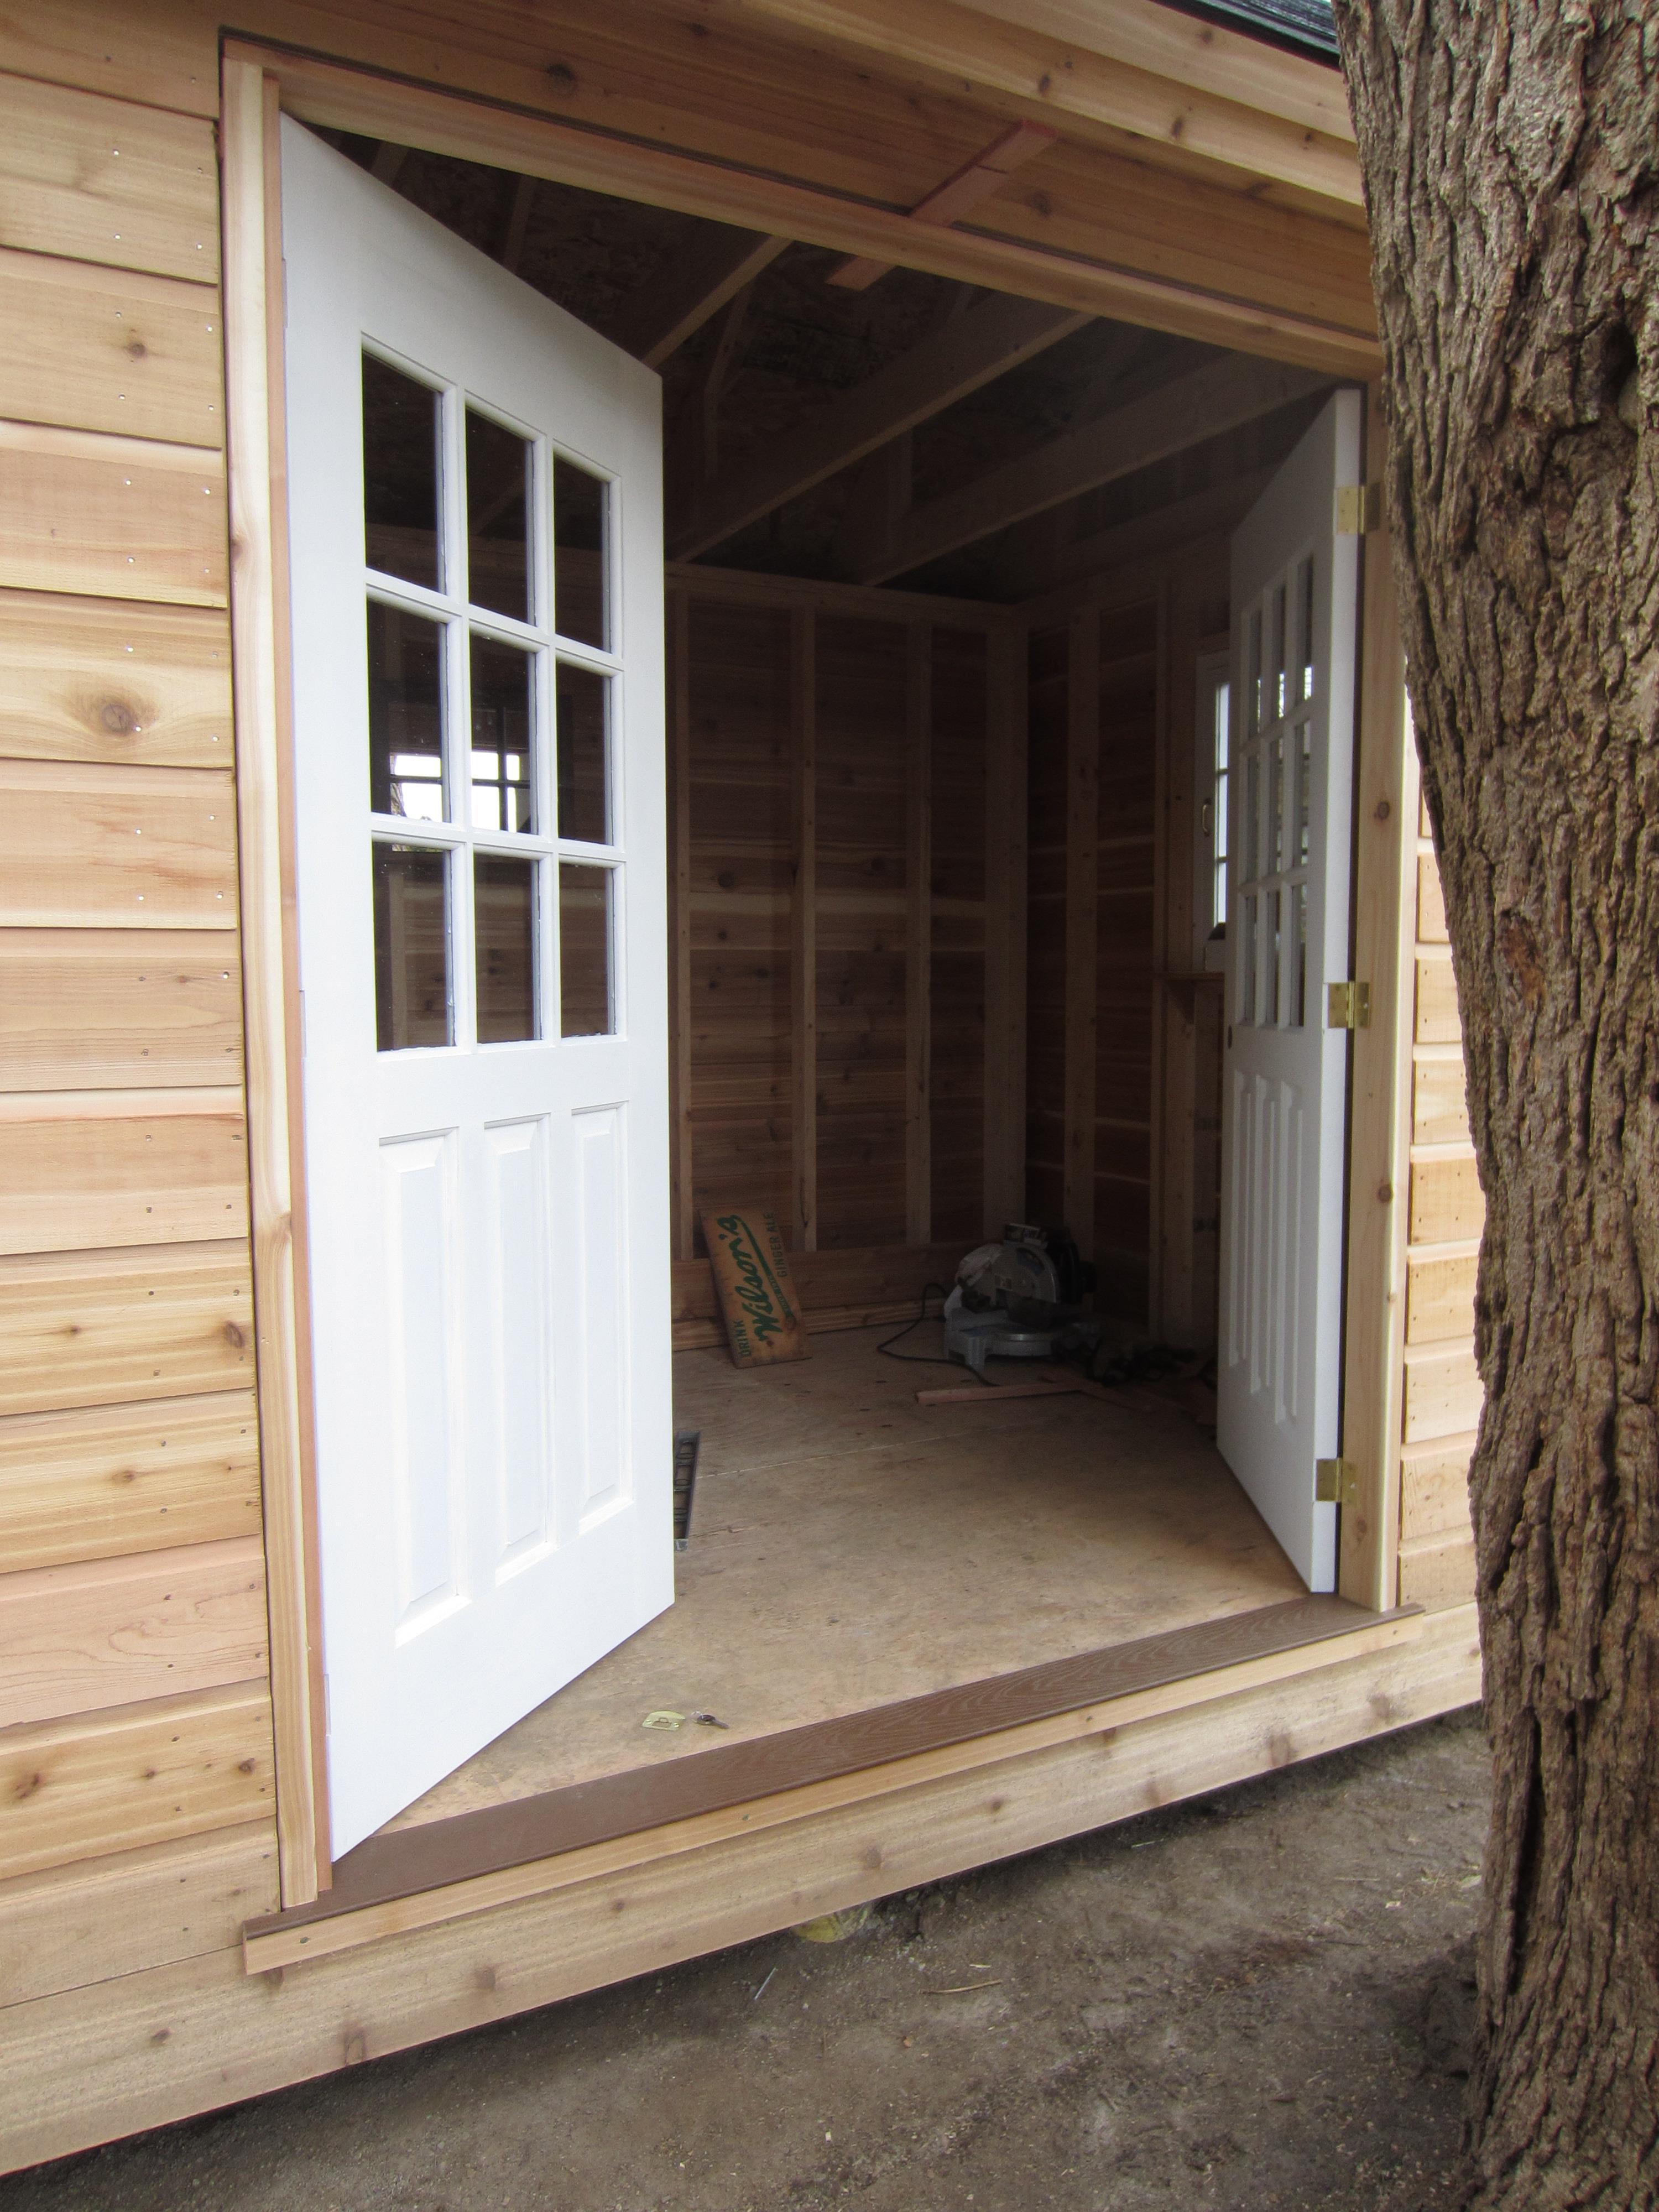 Telluride shed plan 8x12 with Double deluxe 18-lite doors in Los Angeles California. ID number 18451